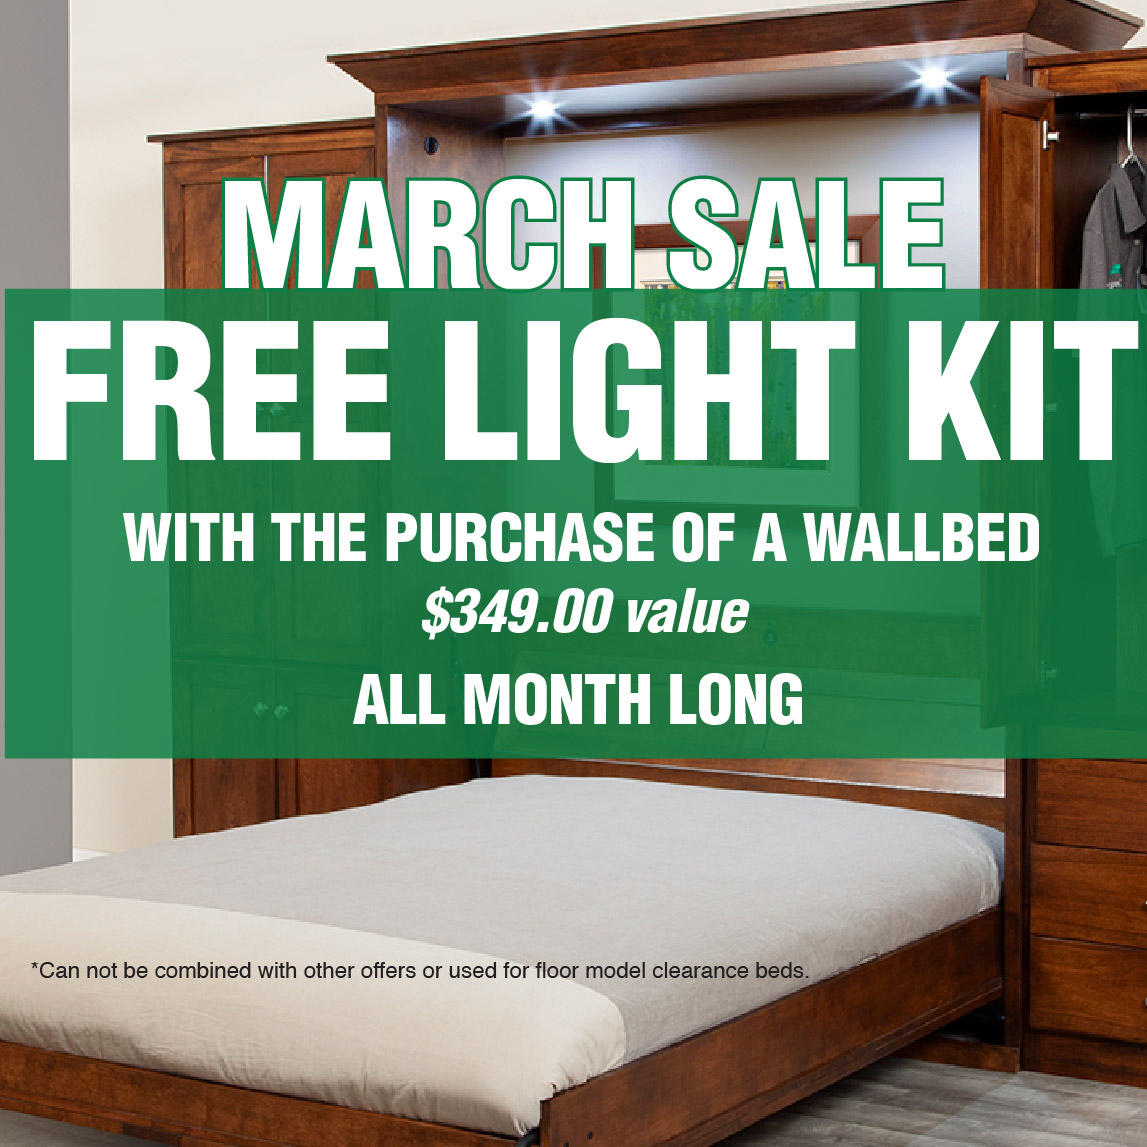 March 2022 Wallbeds N More offer! Call for an appointment today!